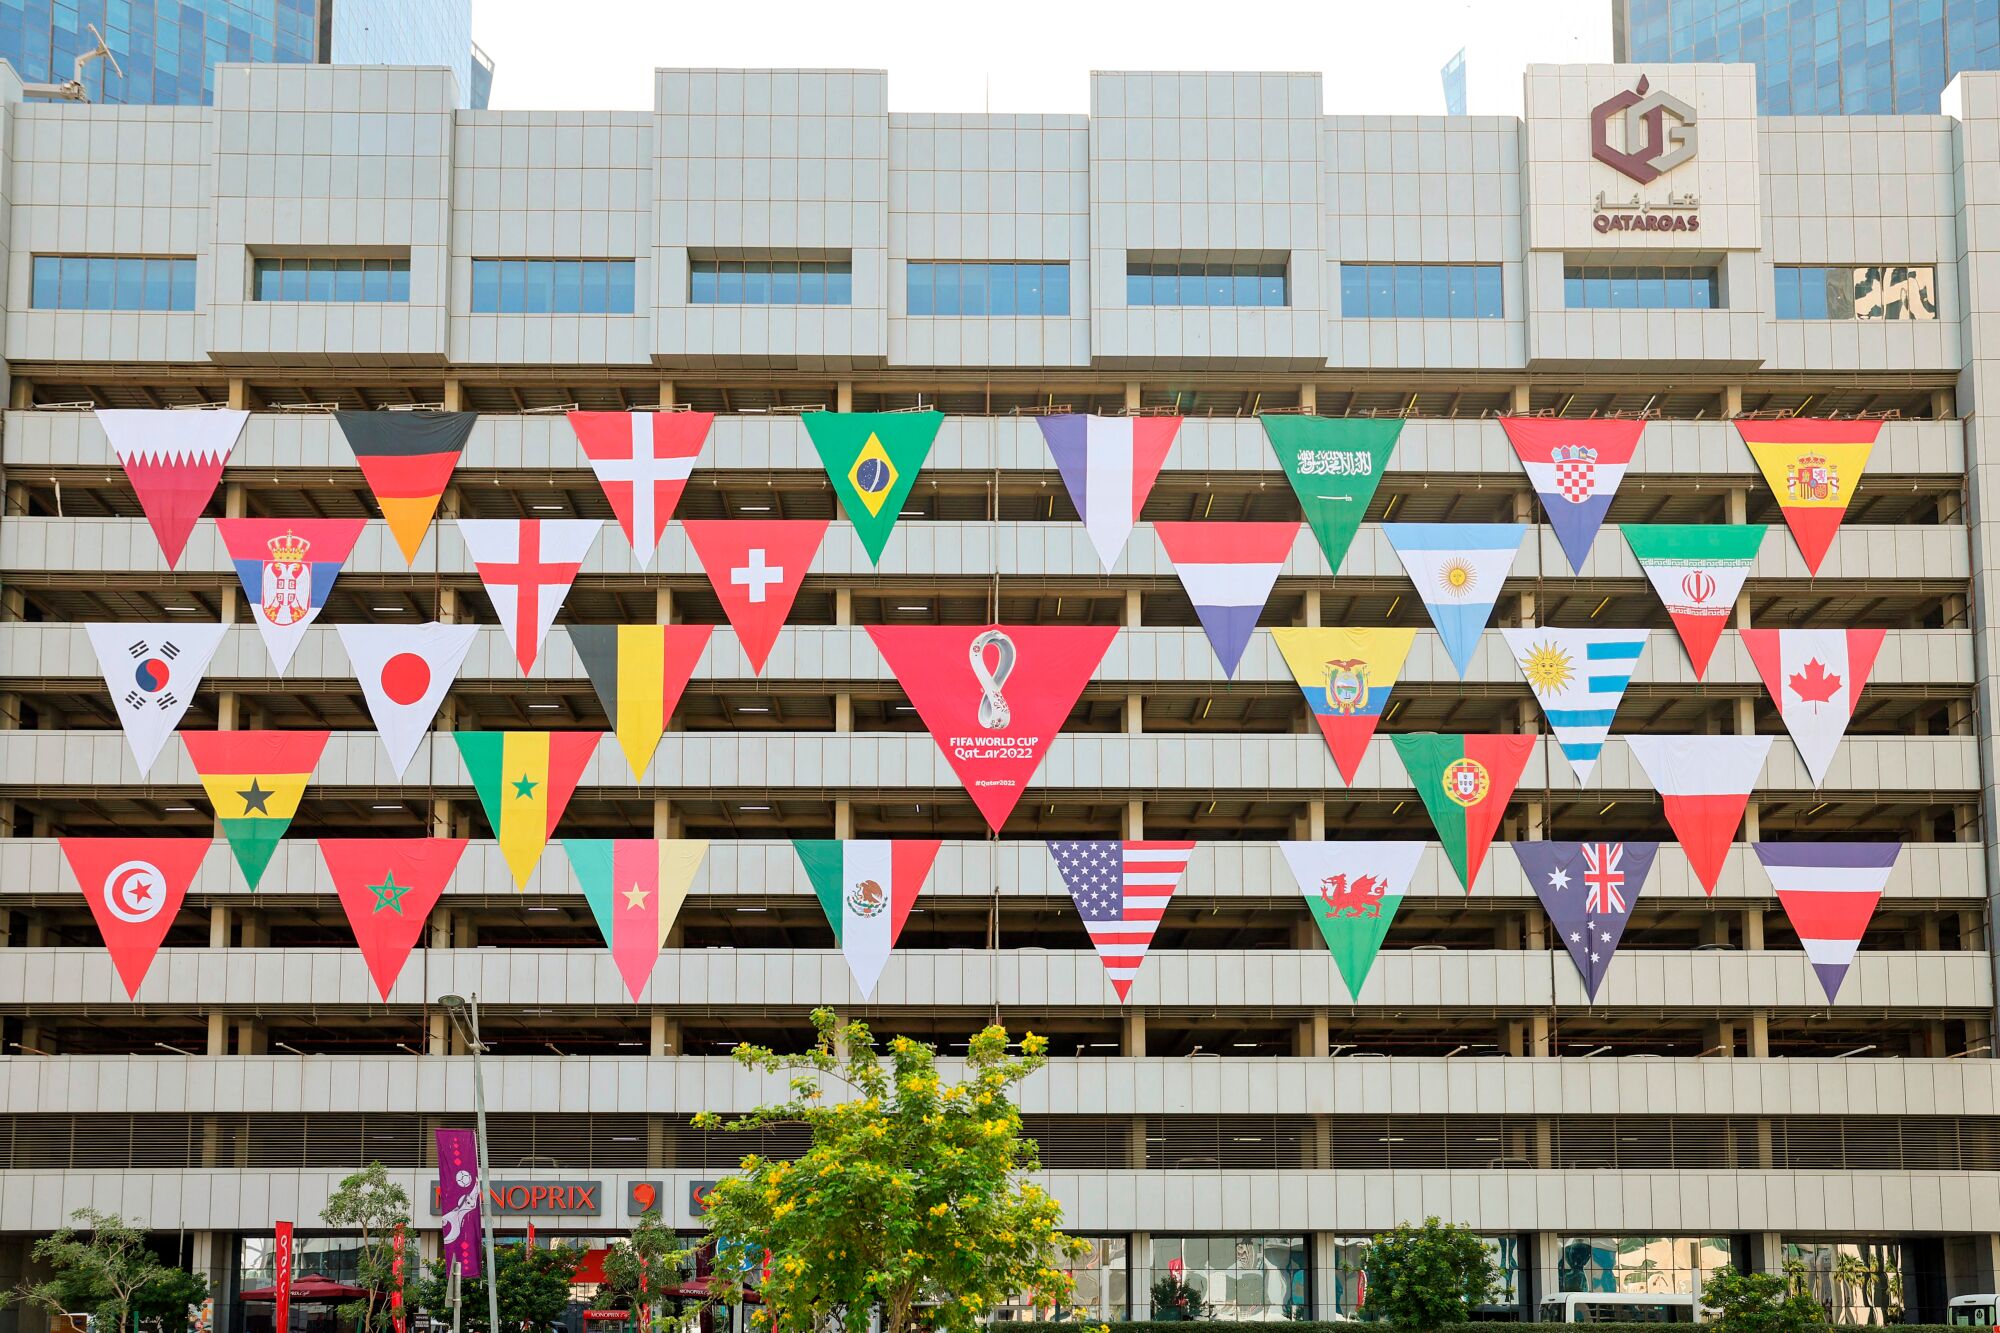 A building decorate with the flags of the teams participating in the 2022 FIFA World Cup in the Qatari capital Doha.